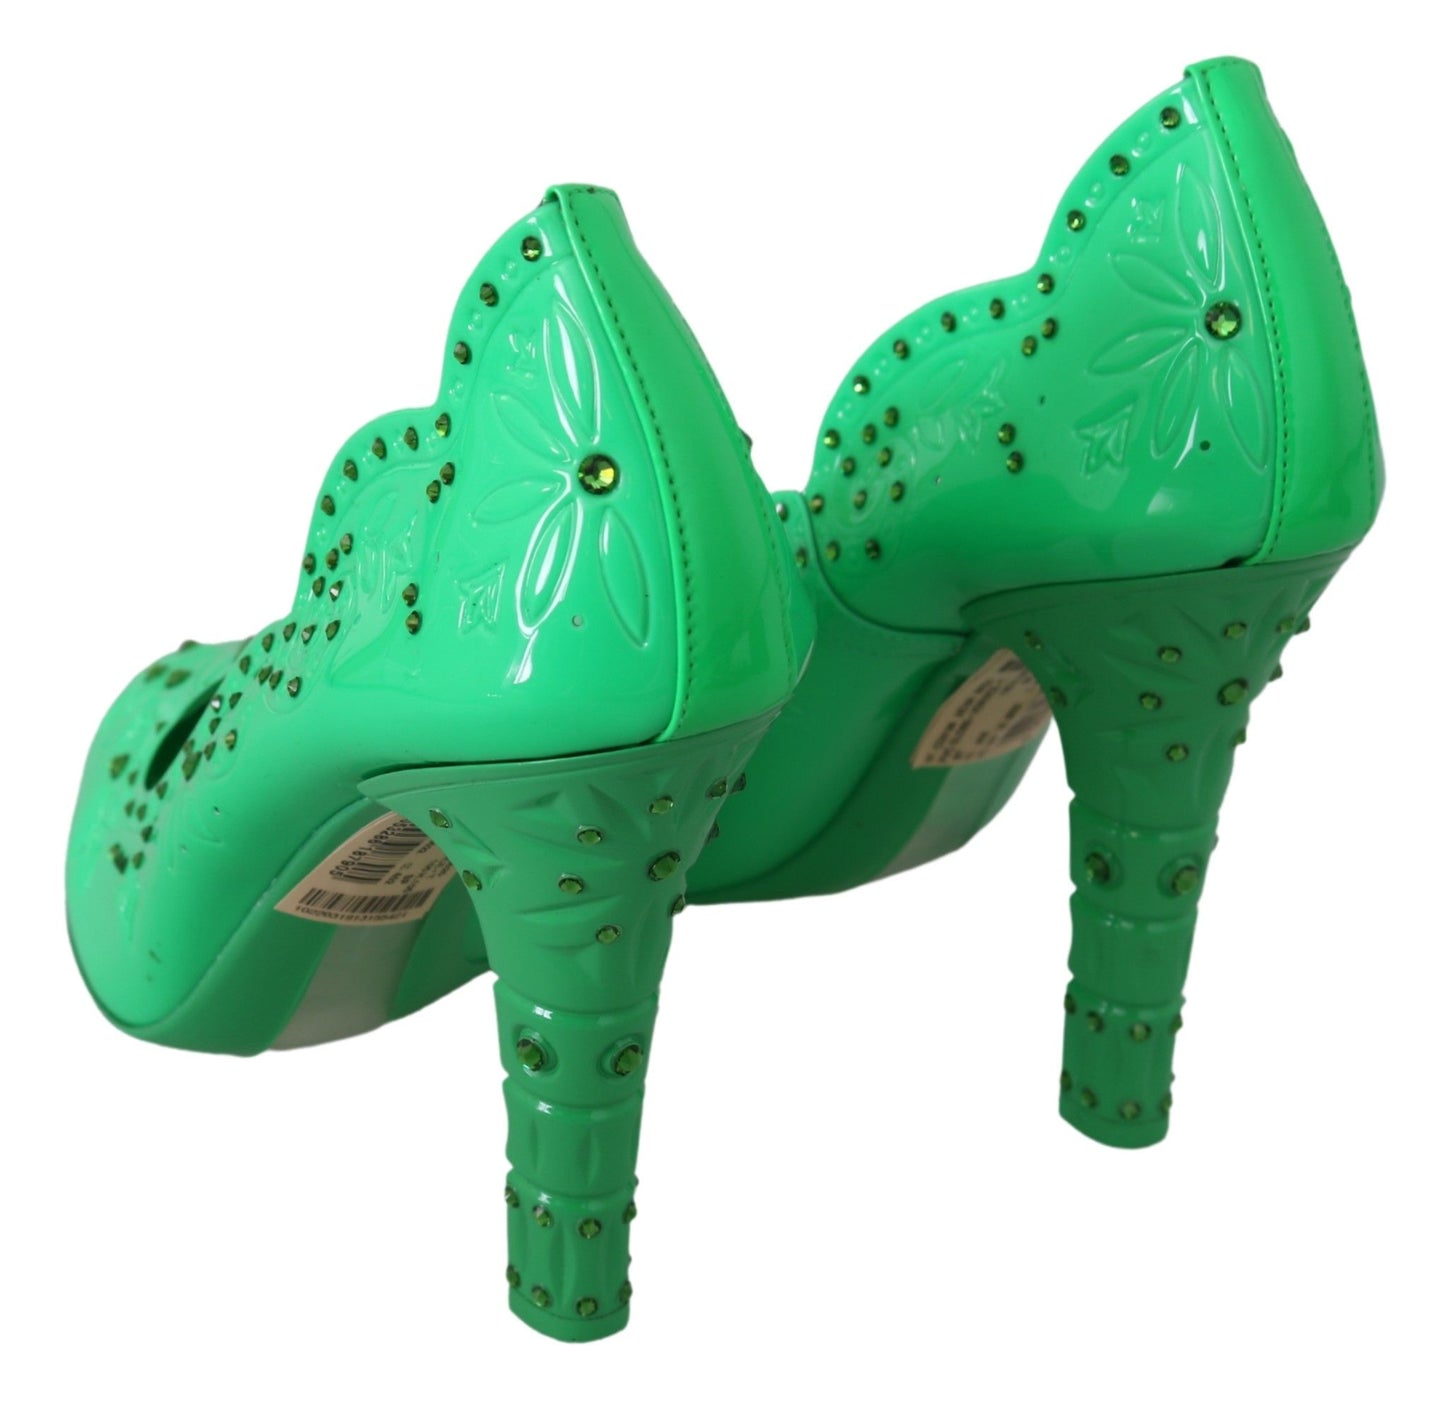 Green Crystal Floral Heels CINDERELLA Shoes - Designed by Dolce & Gabbana Available to Buy at a Discounted Price on Moon Behind The Hill Online Designer Discount Store